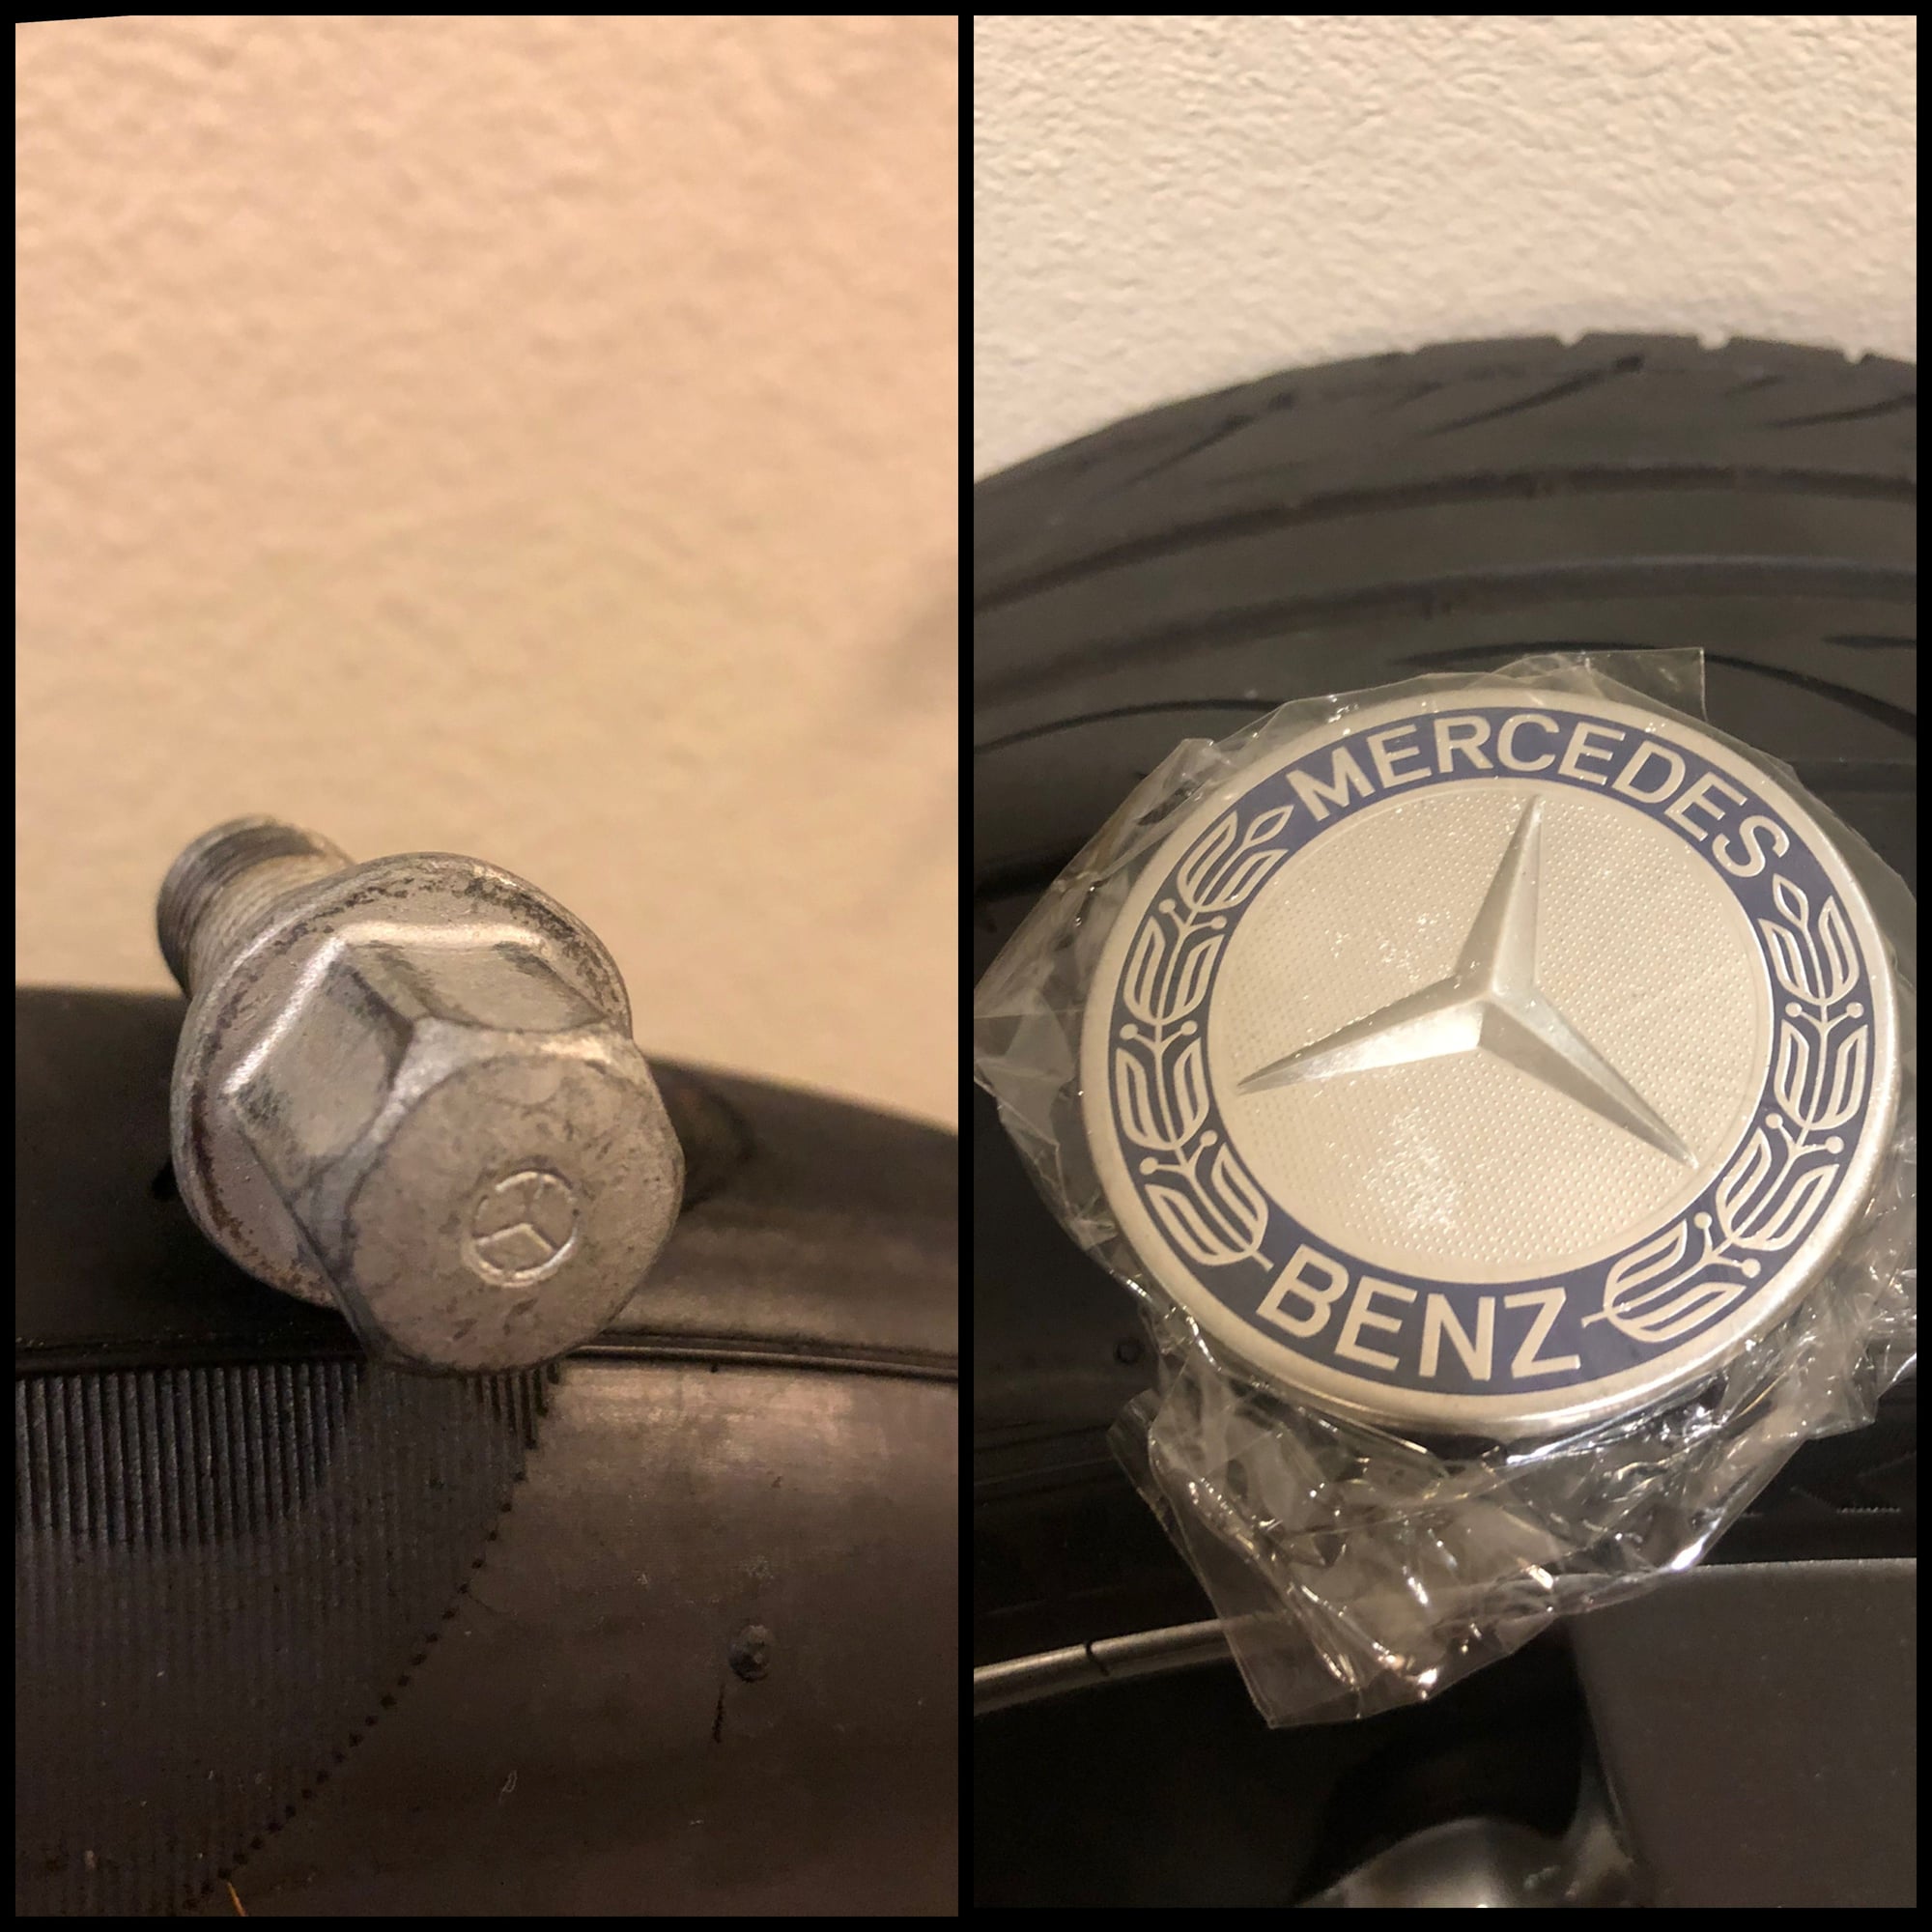 Wheels and Tires/Axles - FS : OEM Mercedes 19" Staggered Titanium Wheels - Used - All Years Mercedes-Benz All Models - Woodland Hills, CA 91364, United States